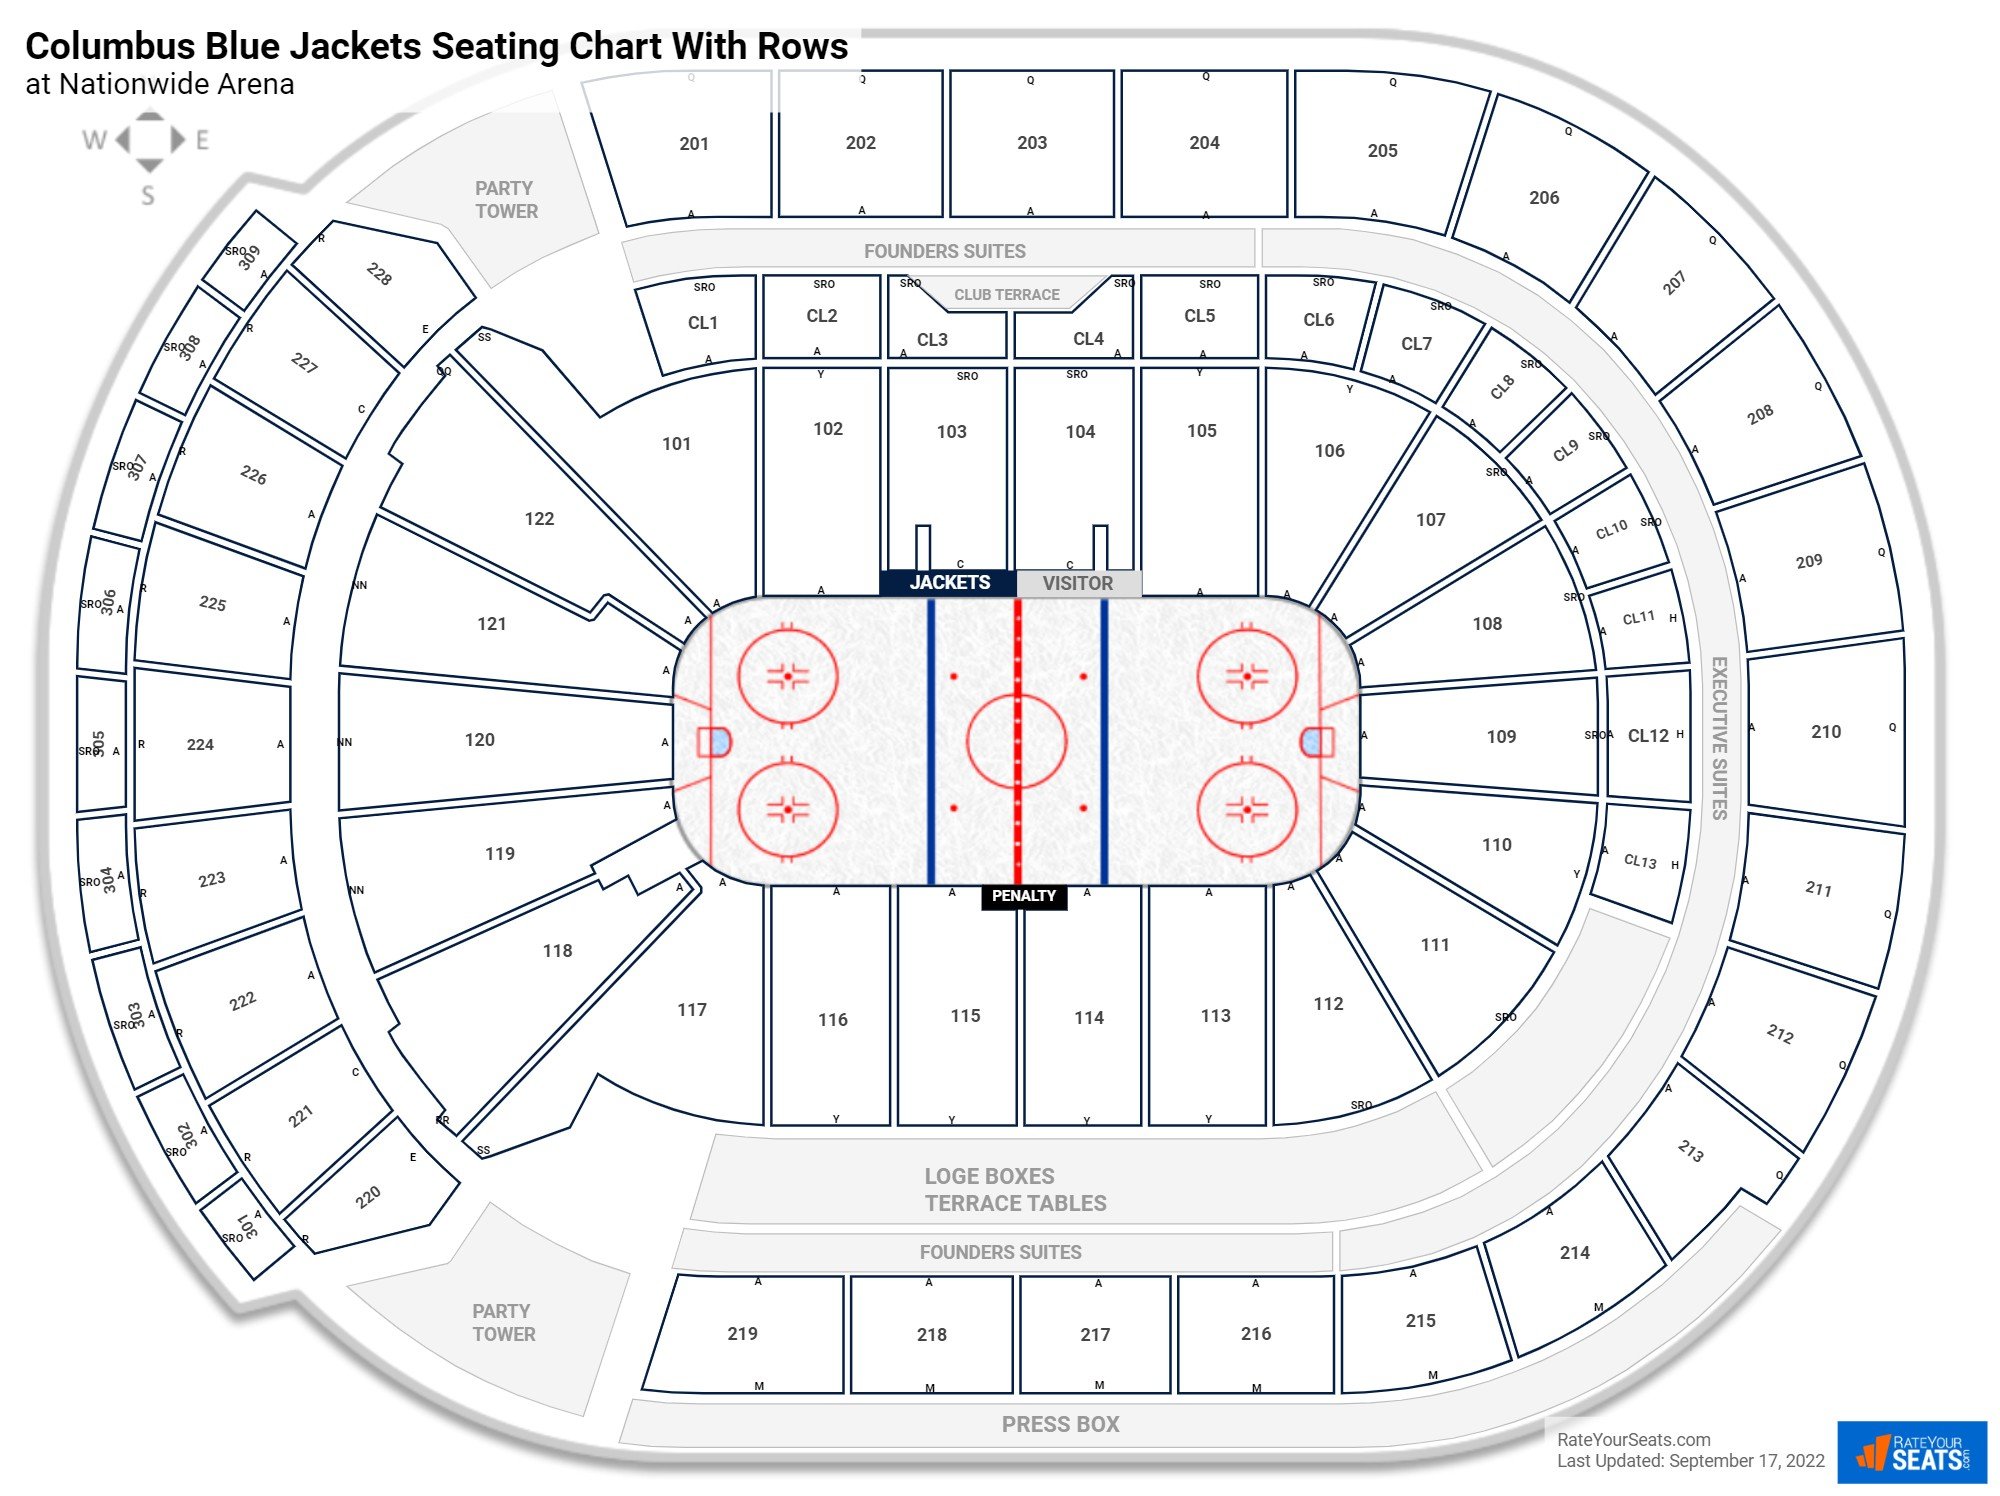 Nationwide Arena seating chart with rows hockey